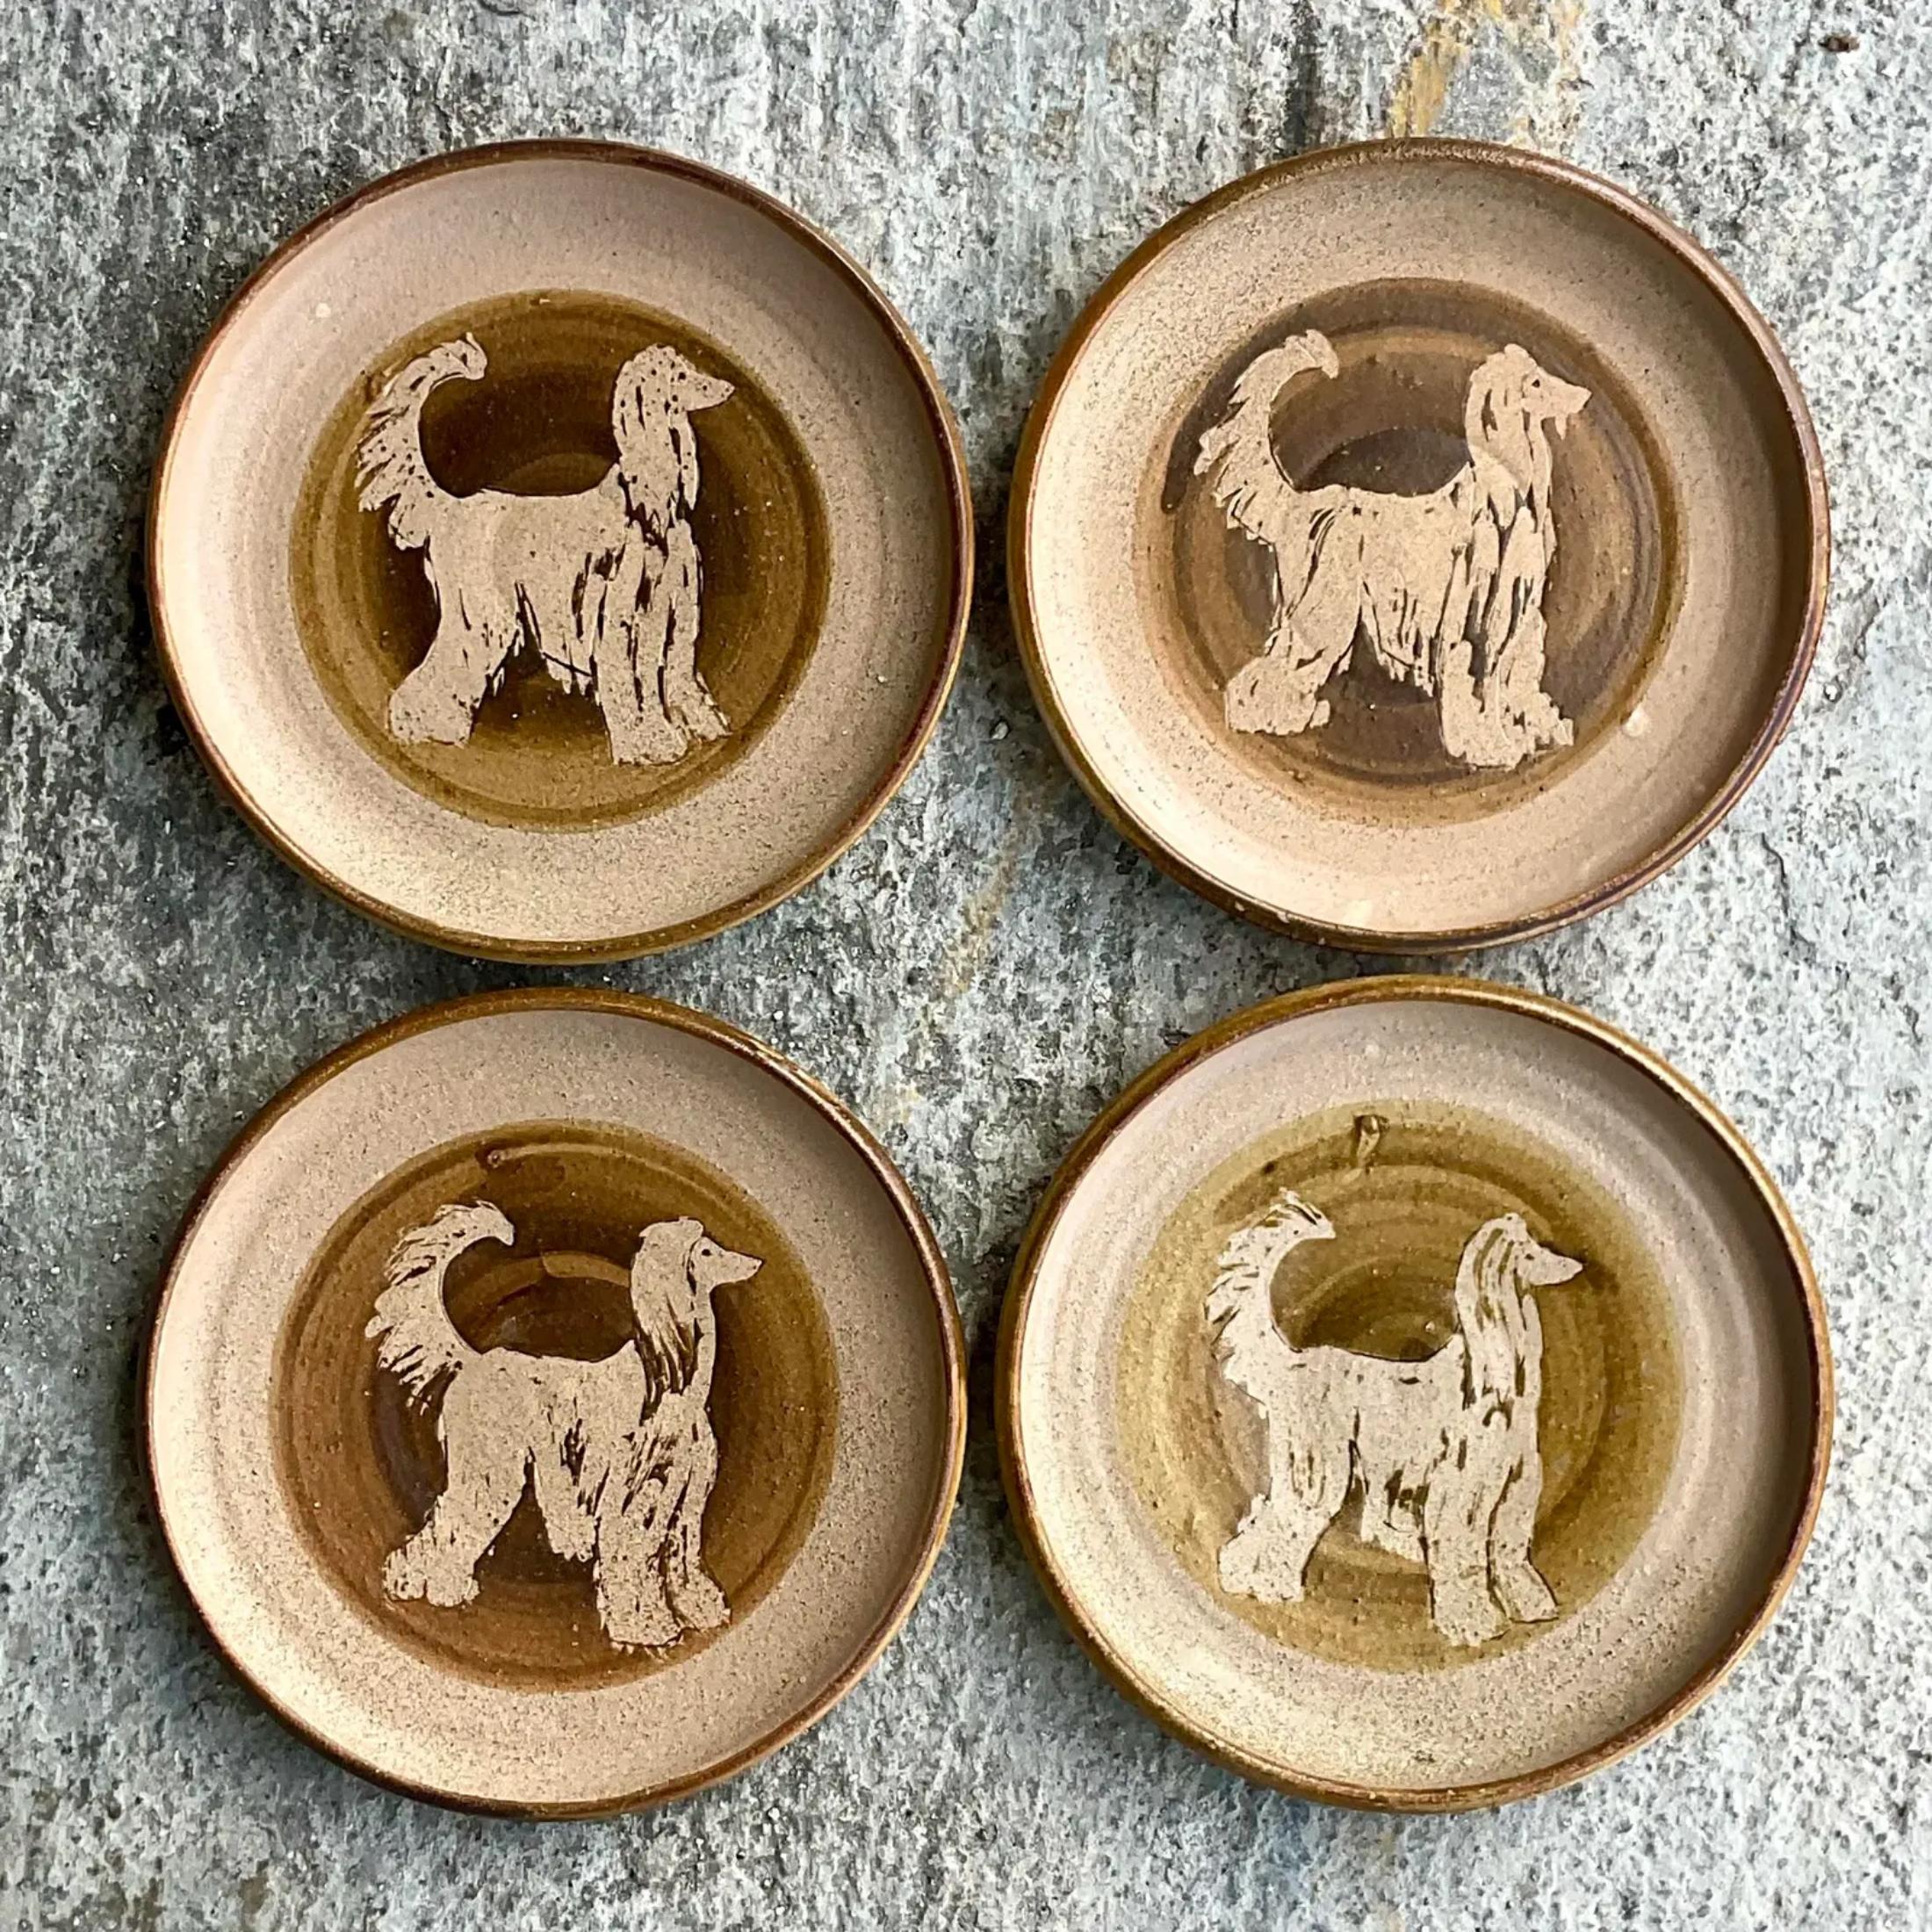 A fabulous set of four vintage plates. Beautiful hand made studio pottery plates with artist signature on the back of each. A chic Afghan dog design in the center of each plate. Acquired from a Palm Beach estate.